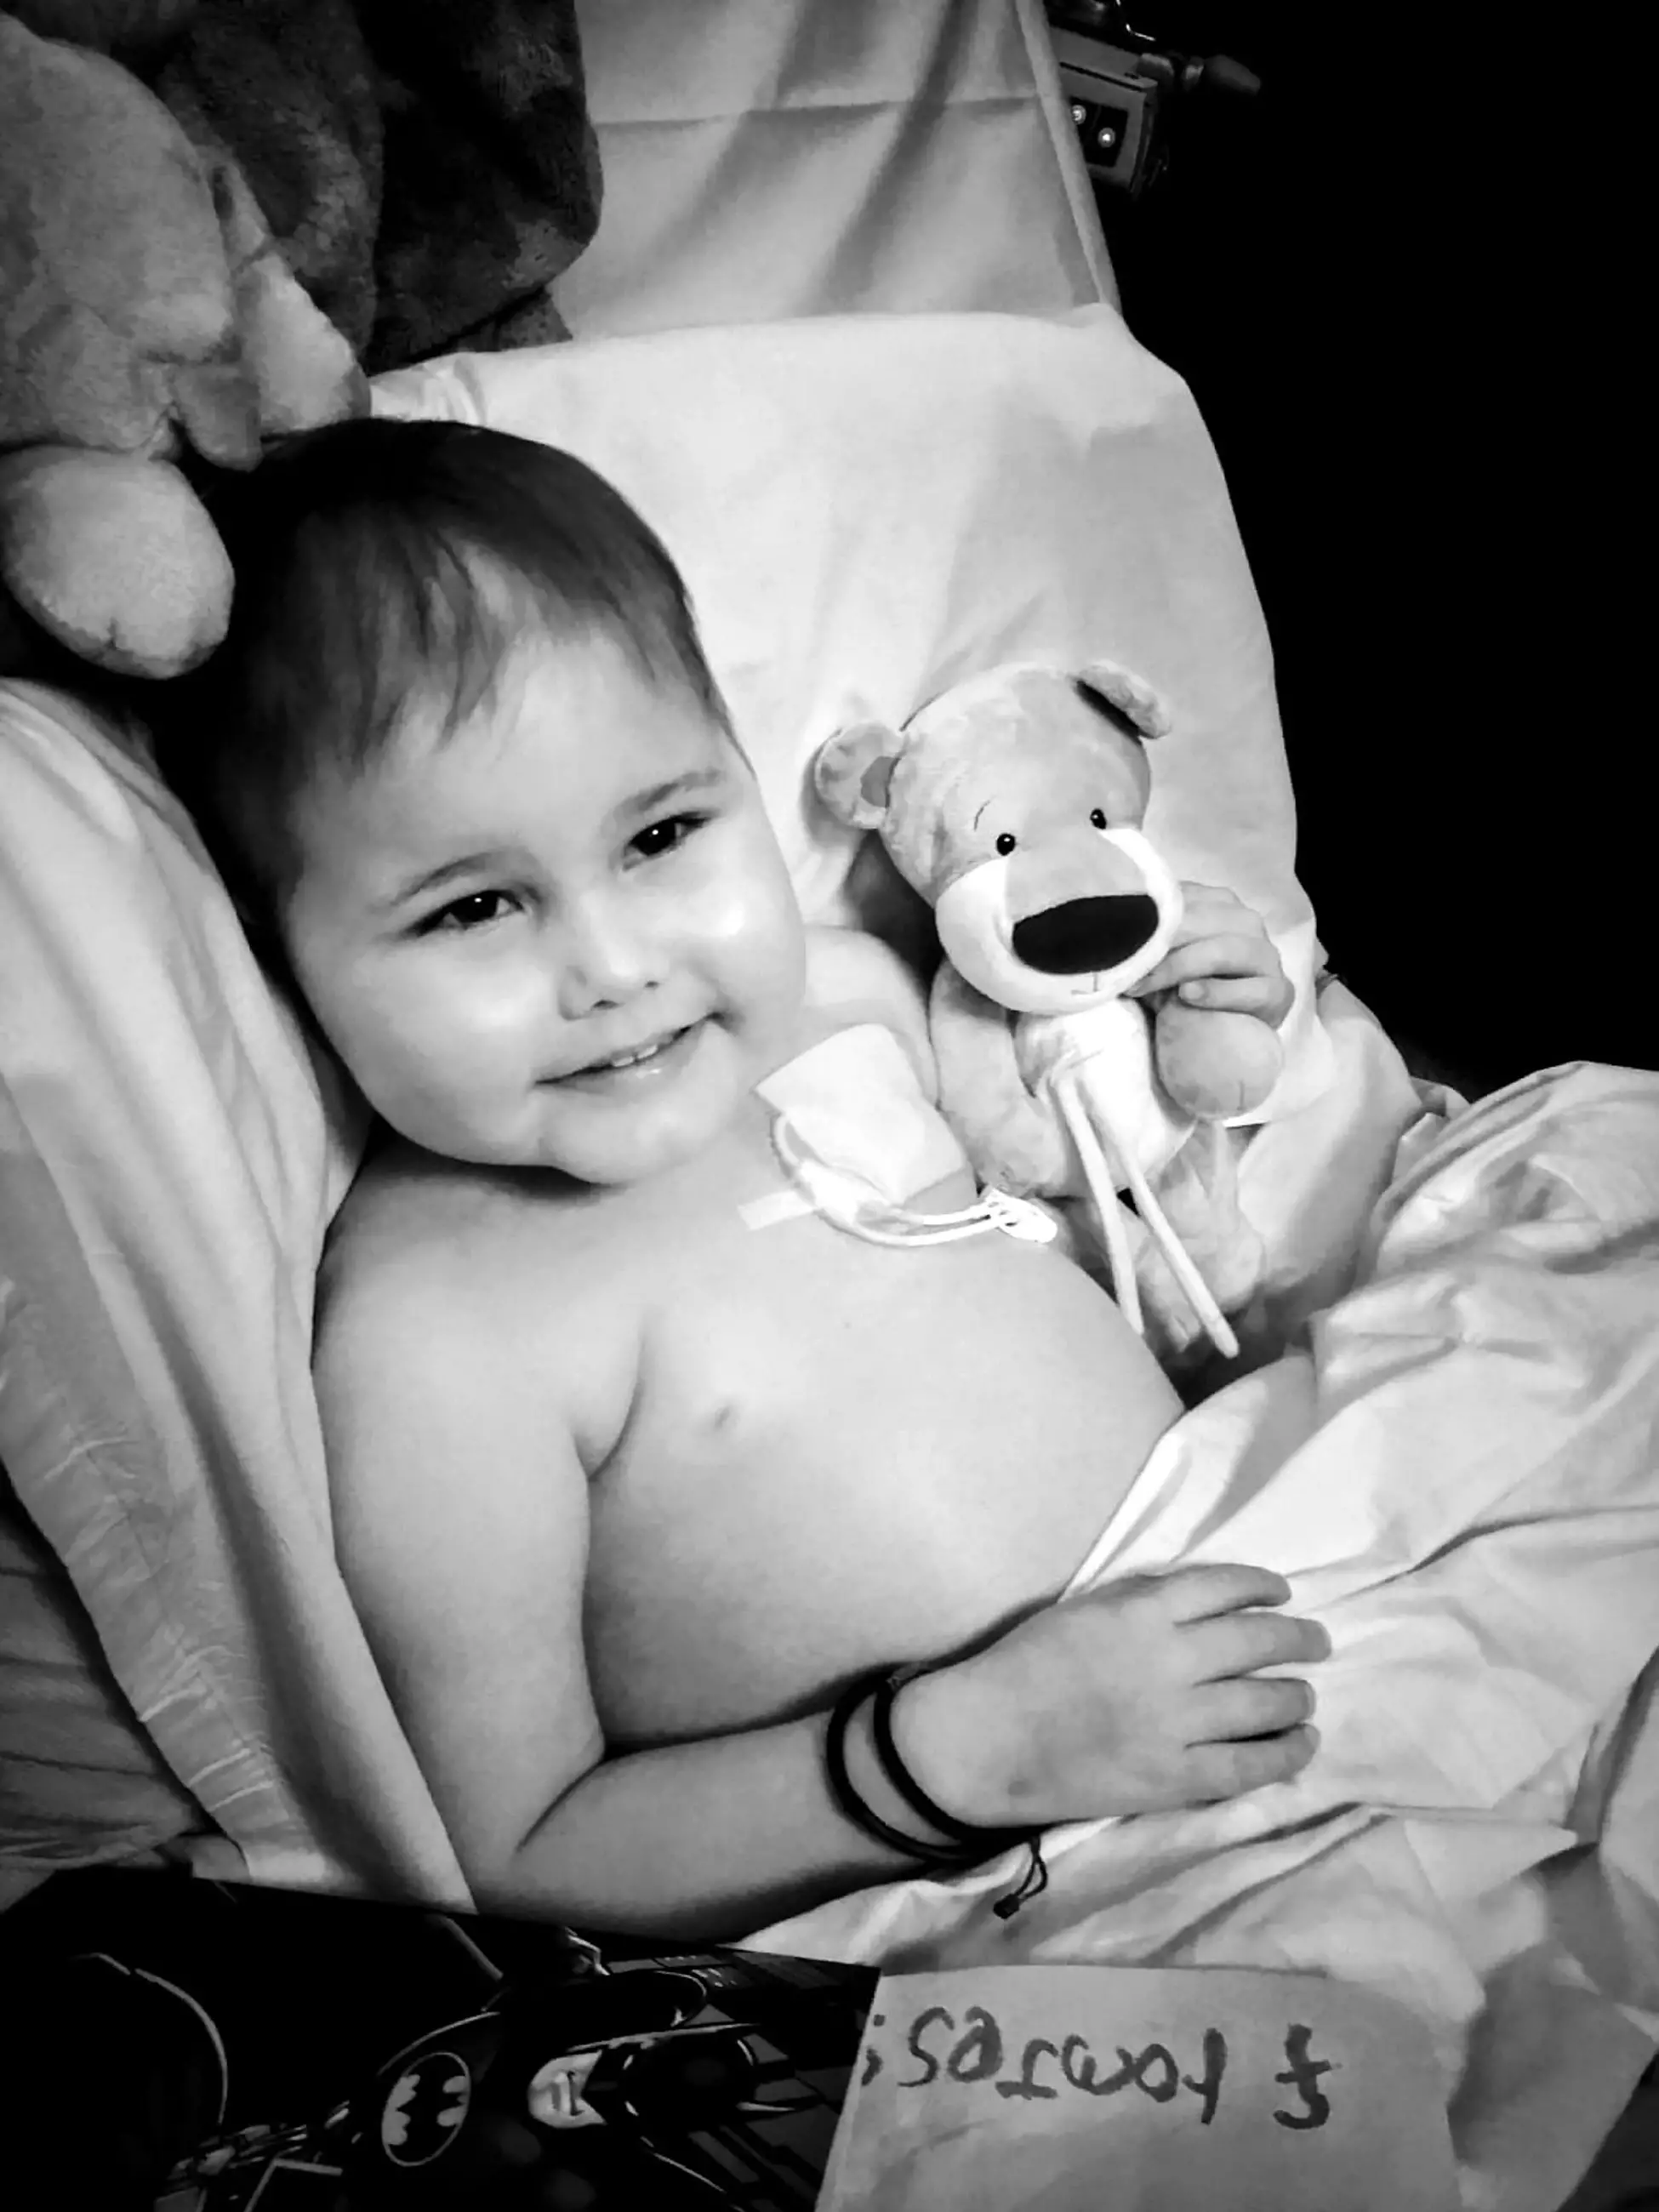 Oscar has a rare type of cancer and needs a stem cell donor.